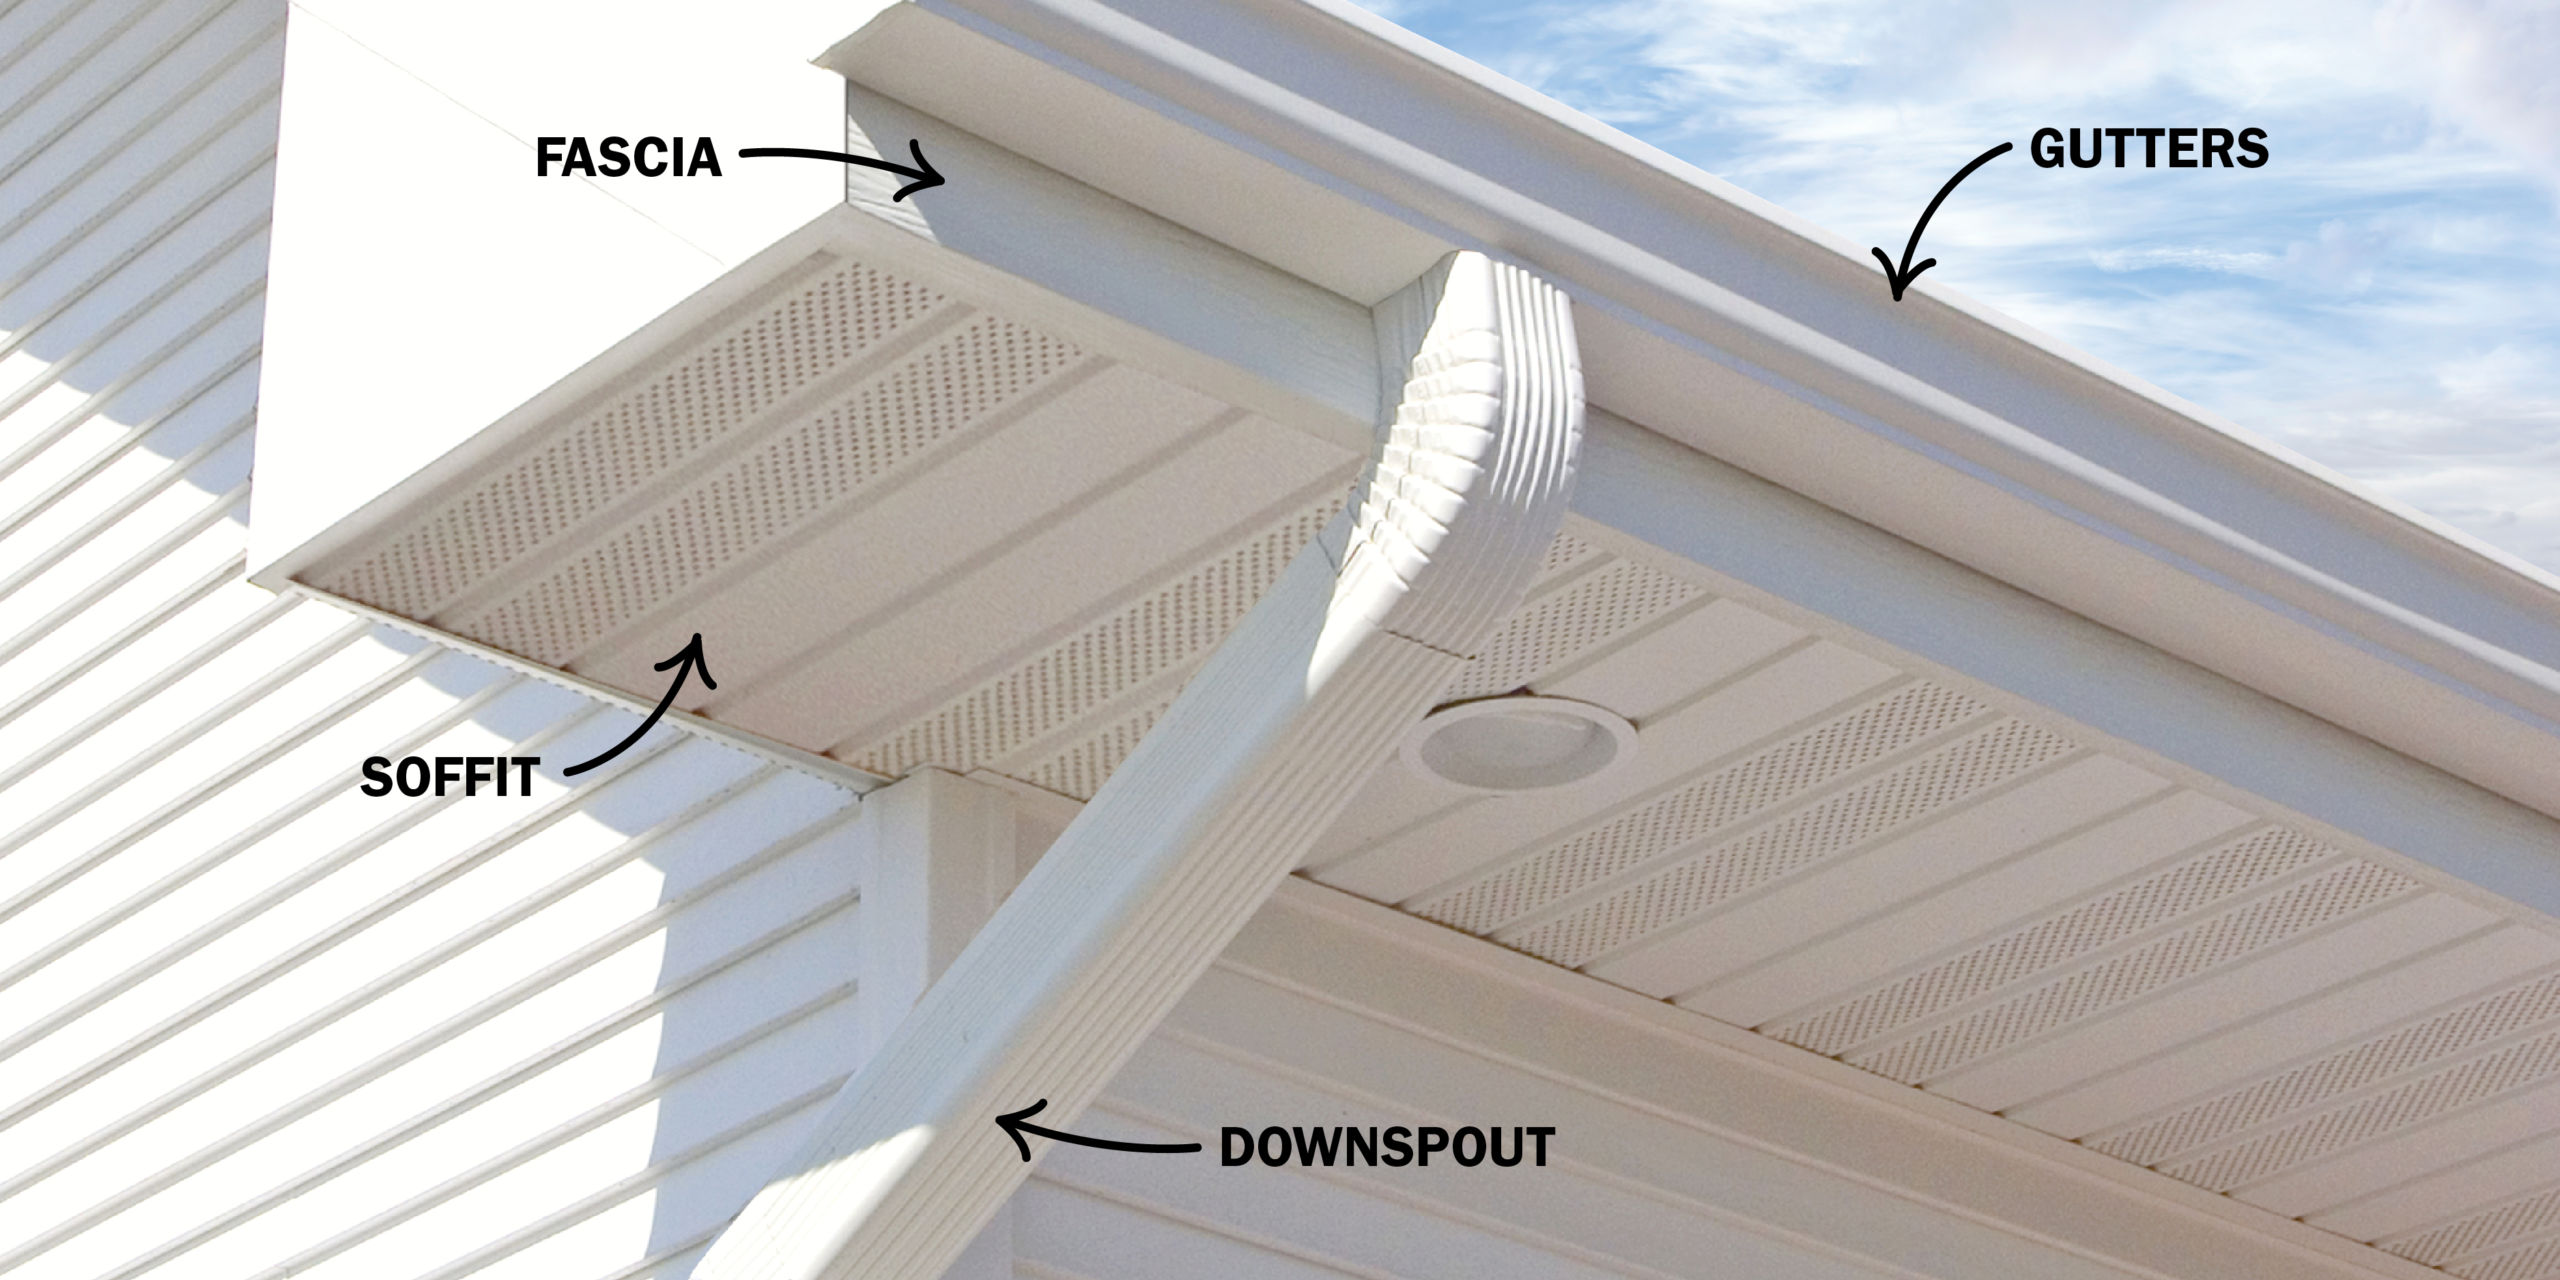 what is fascia on a house made of